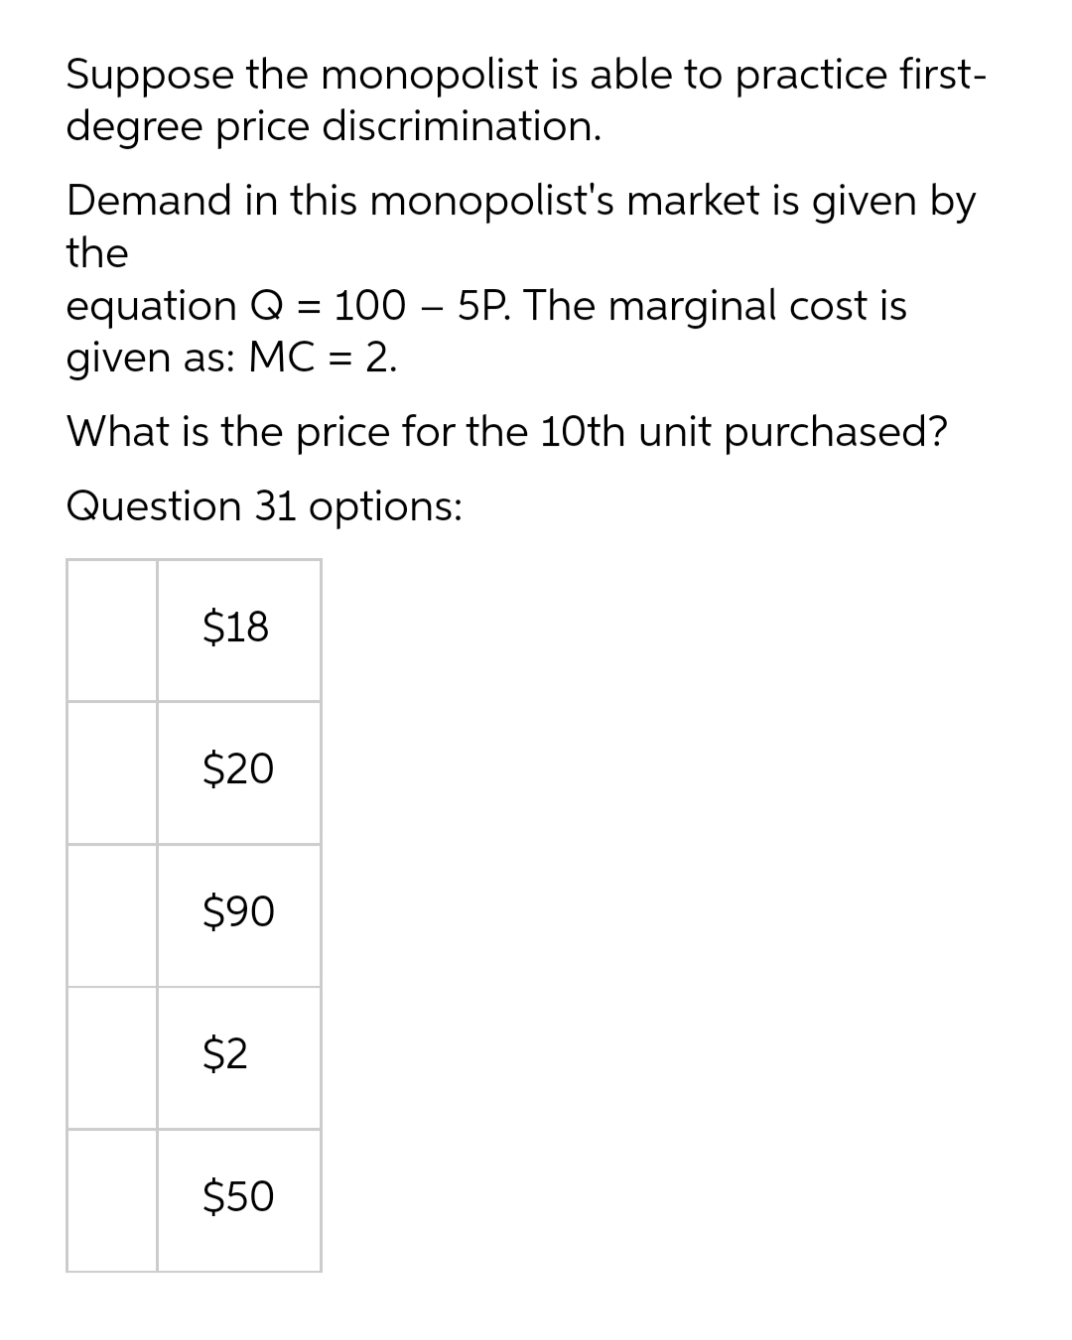 Suppose the monopolist is able to practice first-
degree price discrimination.
Demand in this monopolist's market is given by
the
equation Q = 100 – 5P. The marginal cost is
given as: MC = 2.
%3D
What is the price for the 10th unit purchased?
Question 31 options:
$18
$20
$90
$2
$50
